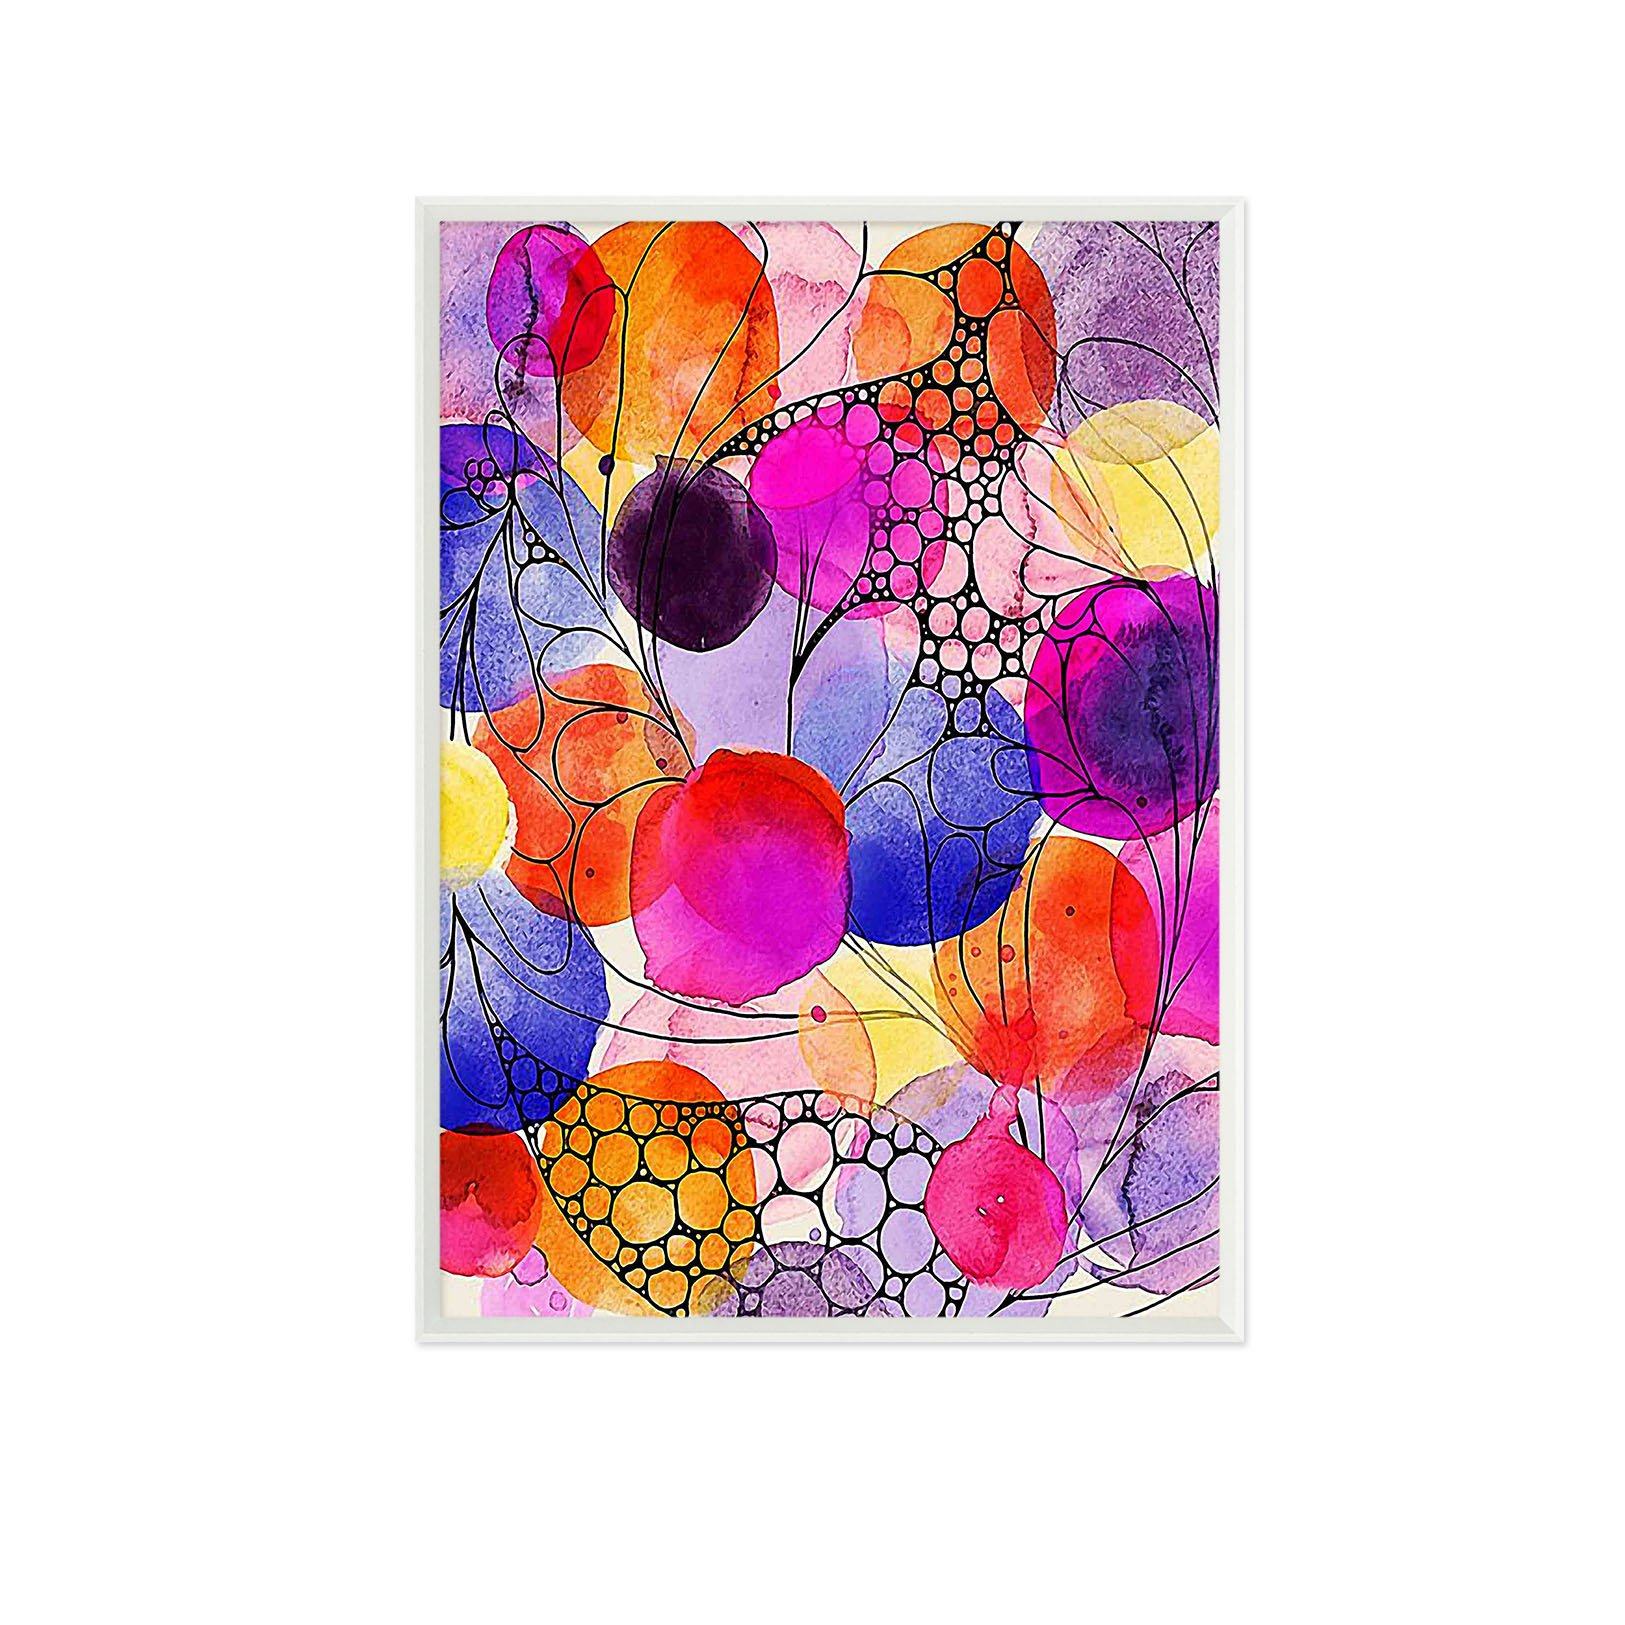 3D Colorful Balloons 095 Fake Framed Print Painting Wallpaper AJ Creativity Home 